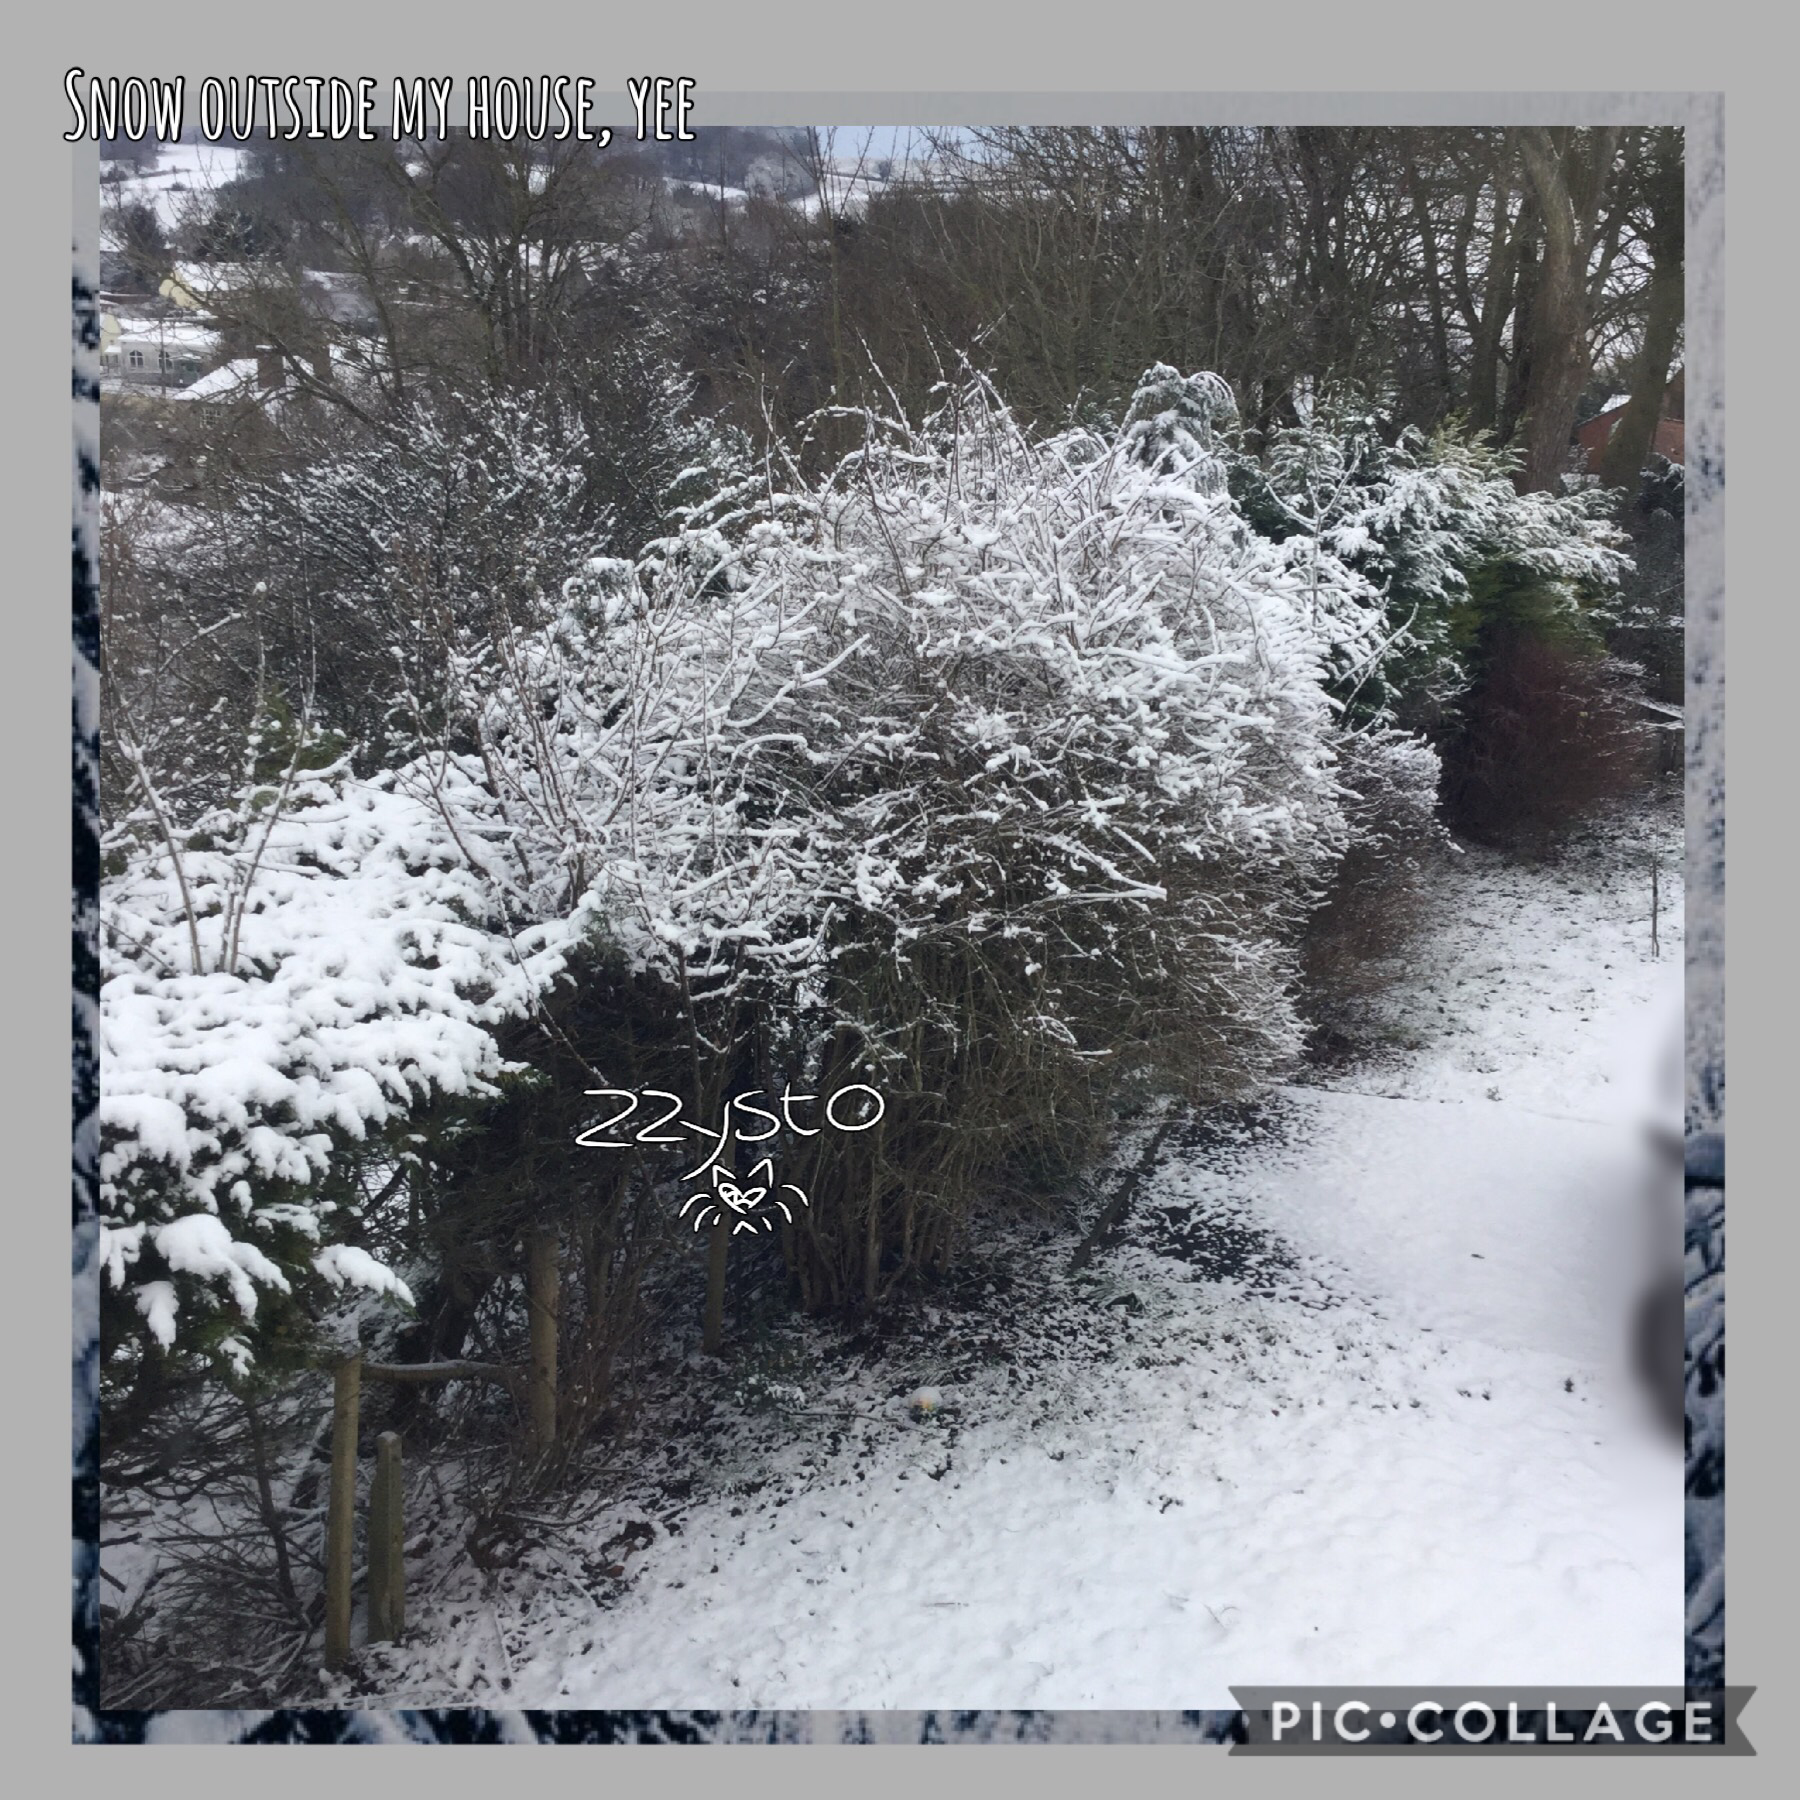 ❄️Tap❄️
School’s cancelled qwq
Anyway here’s a picture of the snow outside my house before my sister and parents go out and ruin it with footprints, lmaø